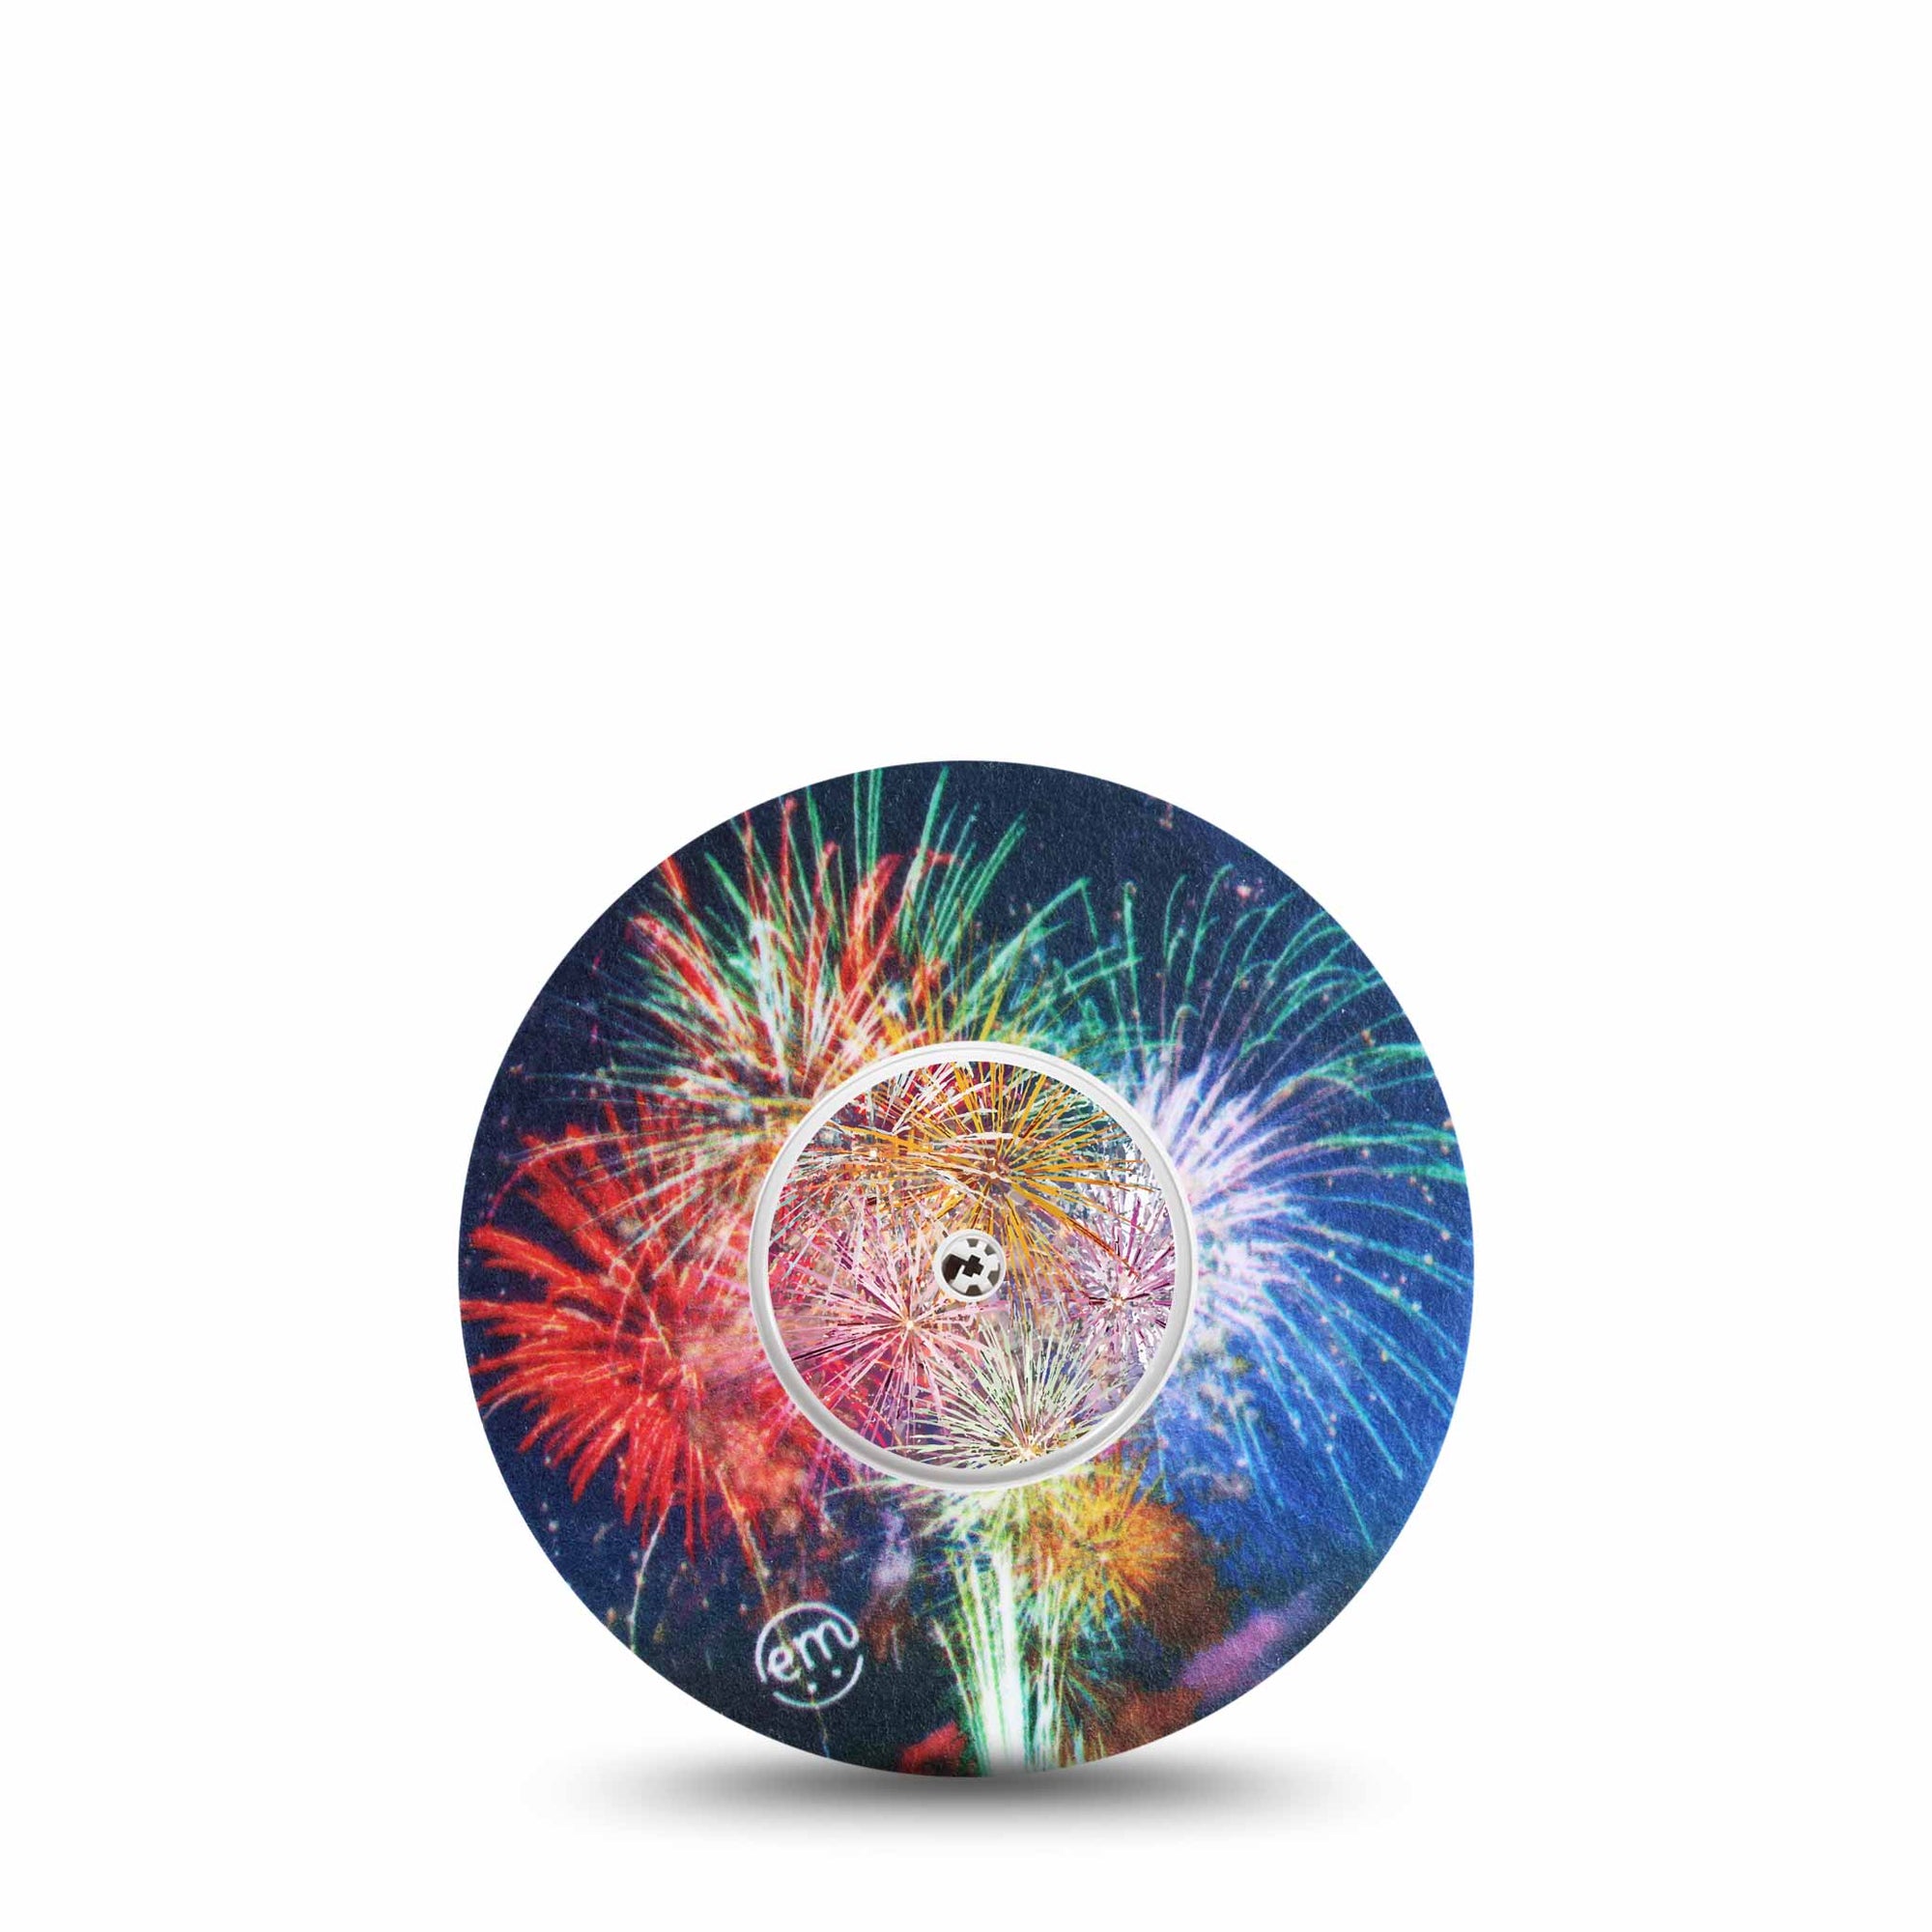 ExpressionMed Fireworks Libre Transmitter Sticker with Tape